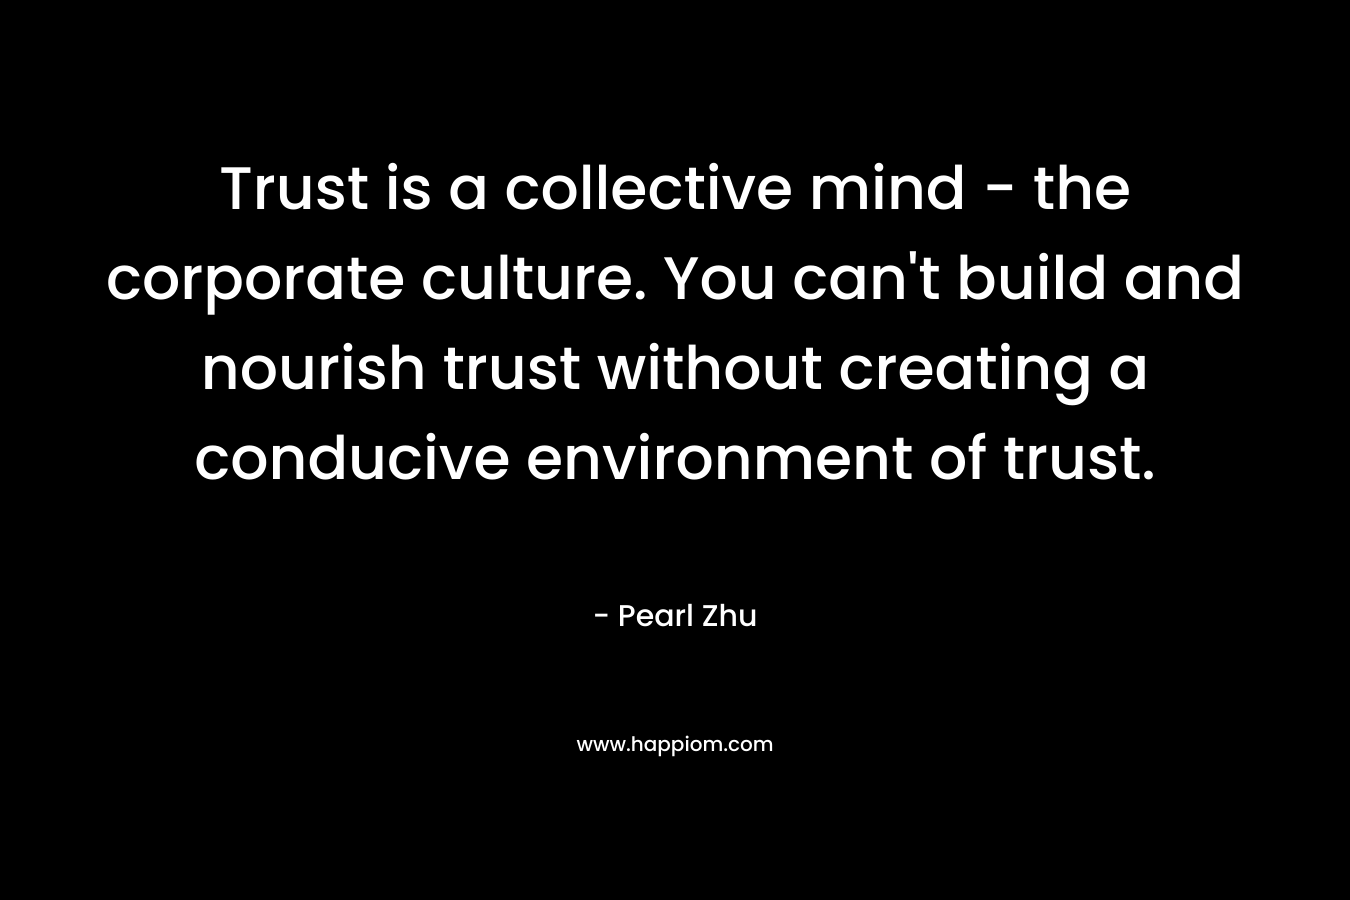 Trust is a collective mind - the corporate culture. You can't build and nourish trust without creating a conducive environment of trust.